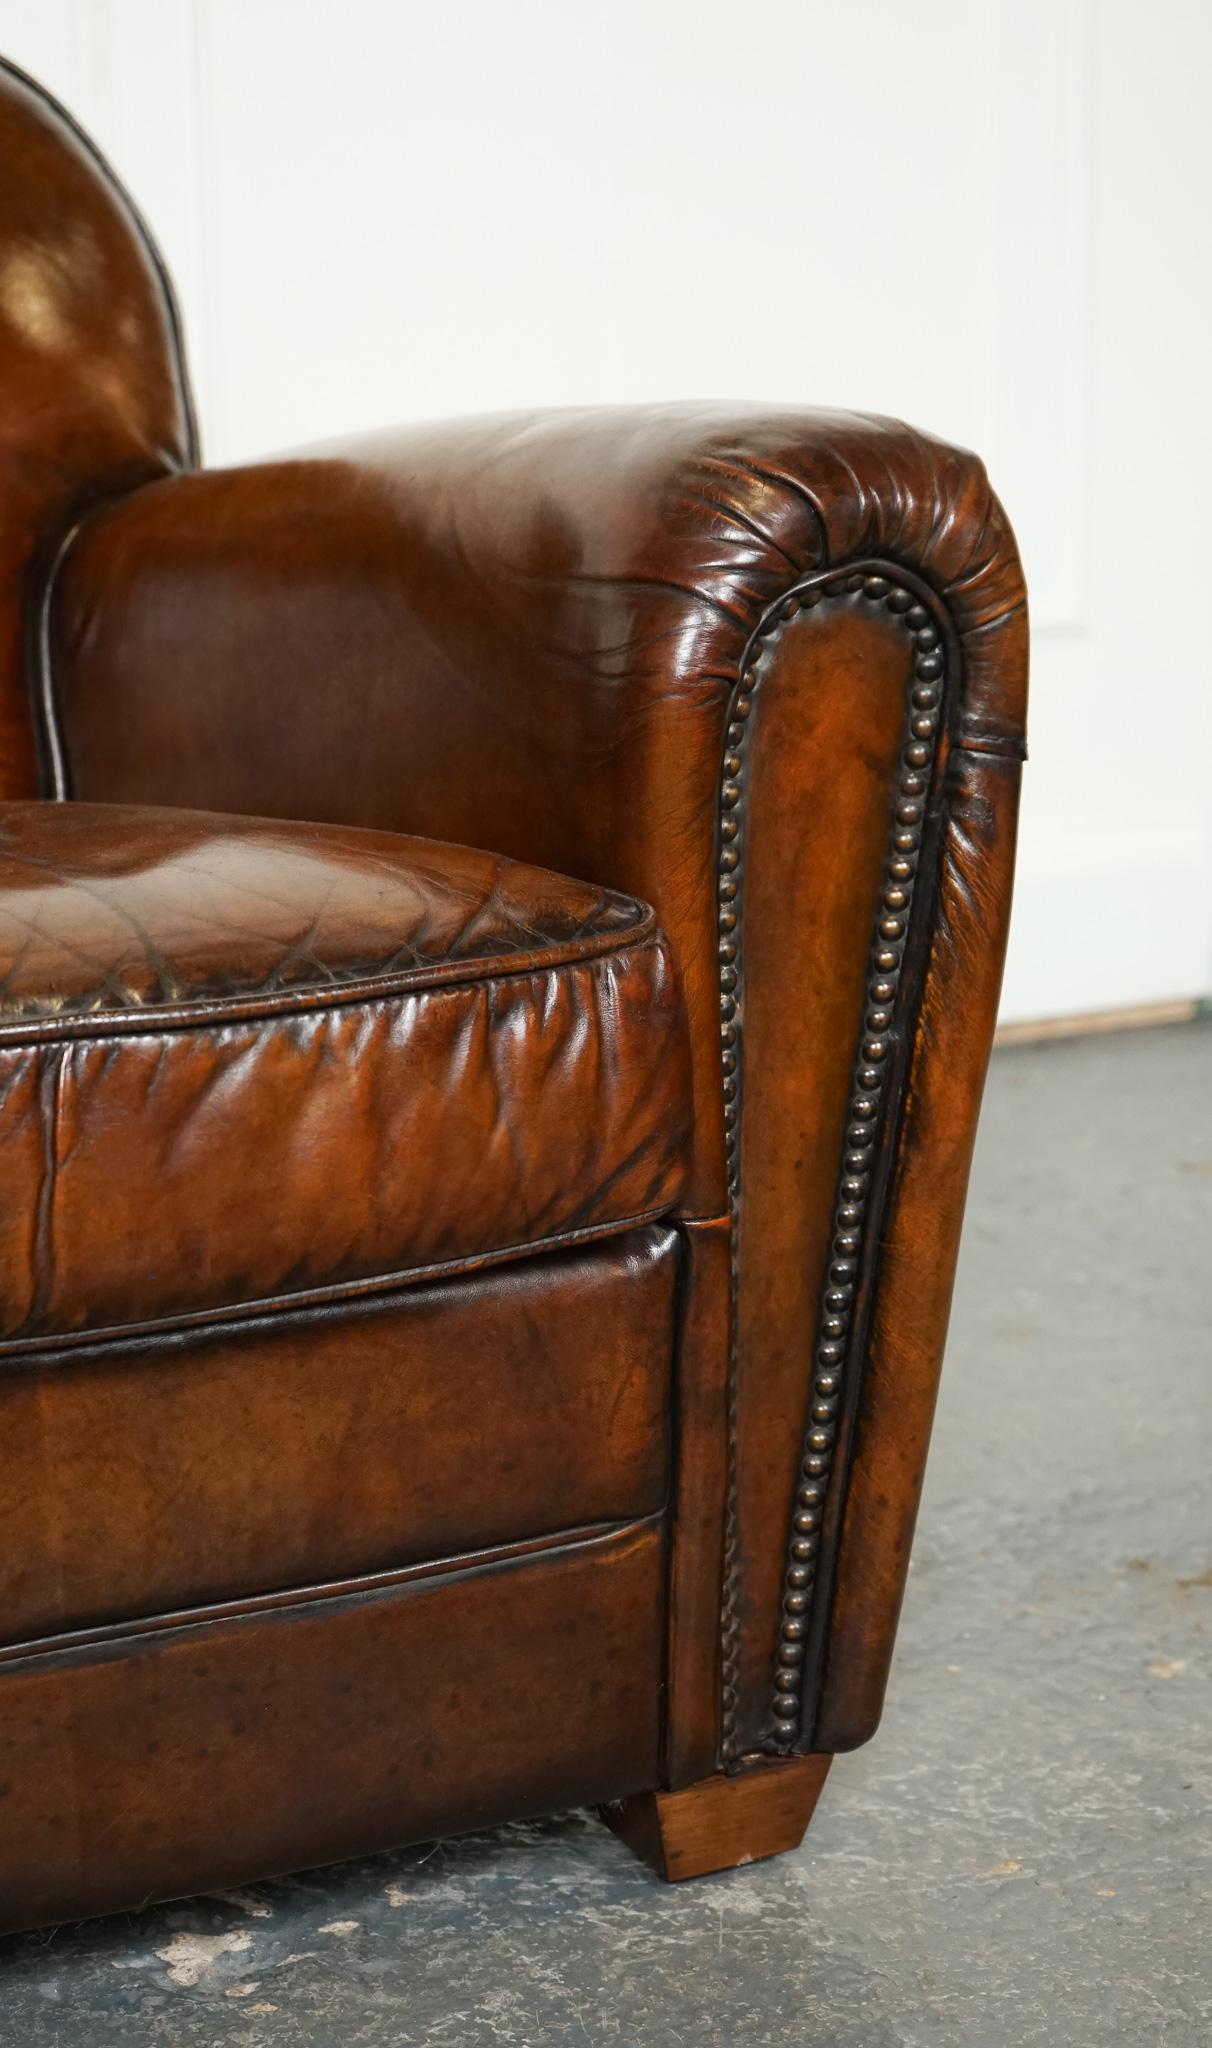 STUNNING PAiR OF ART DECO Style HAND DYED WHISKEY BROWN CLUB ARMCHAIRS im Angebot 2